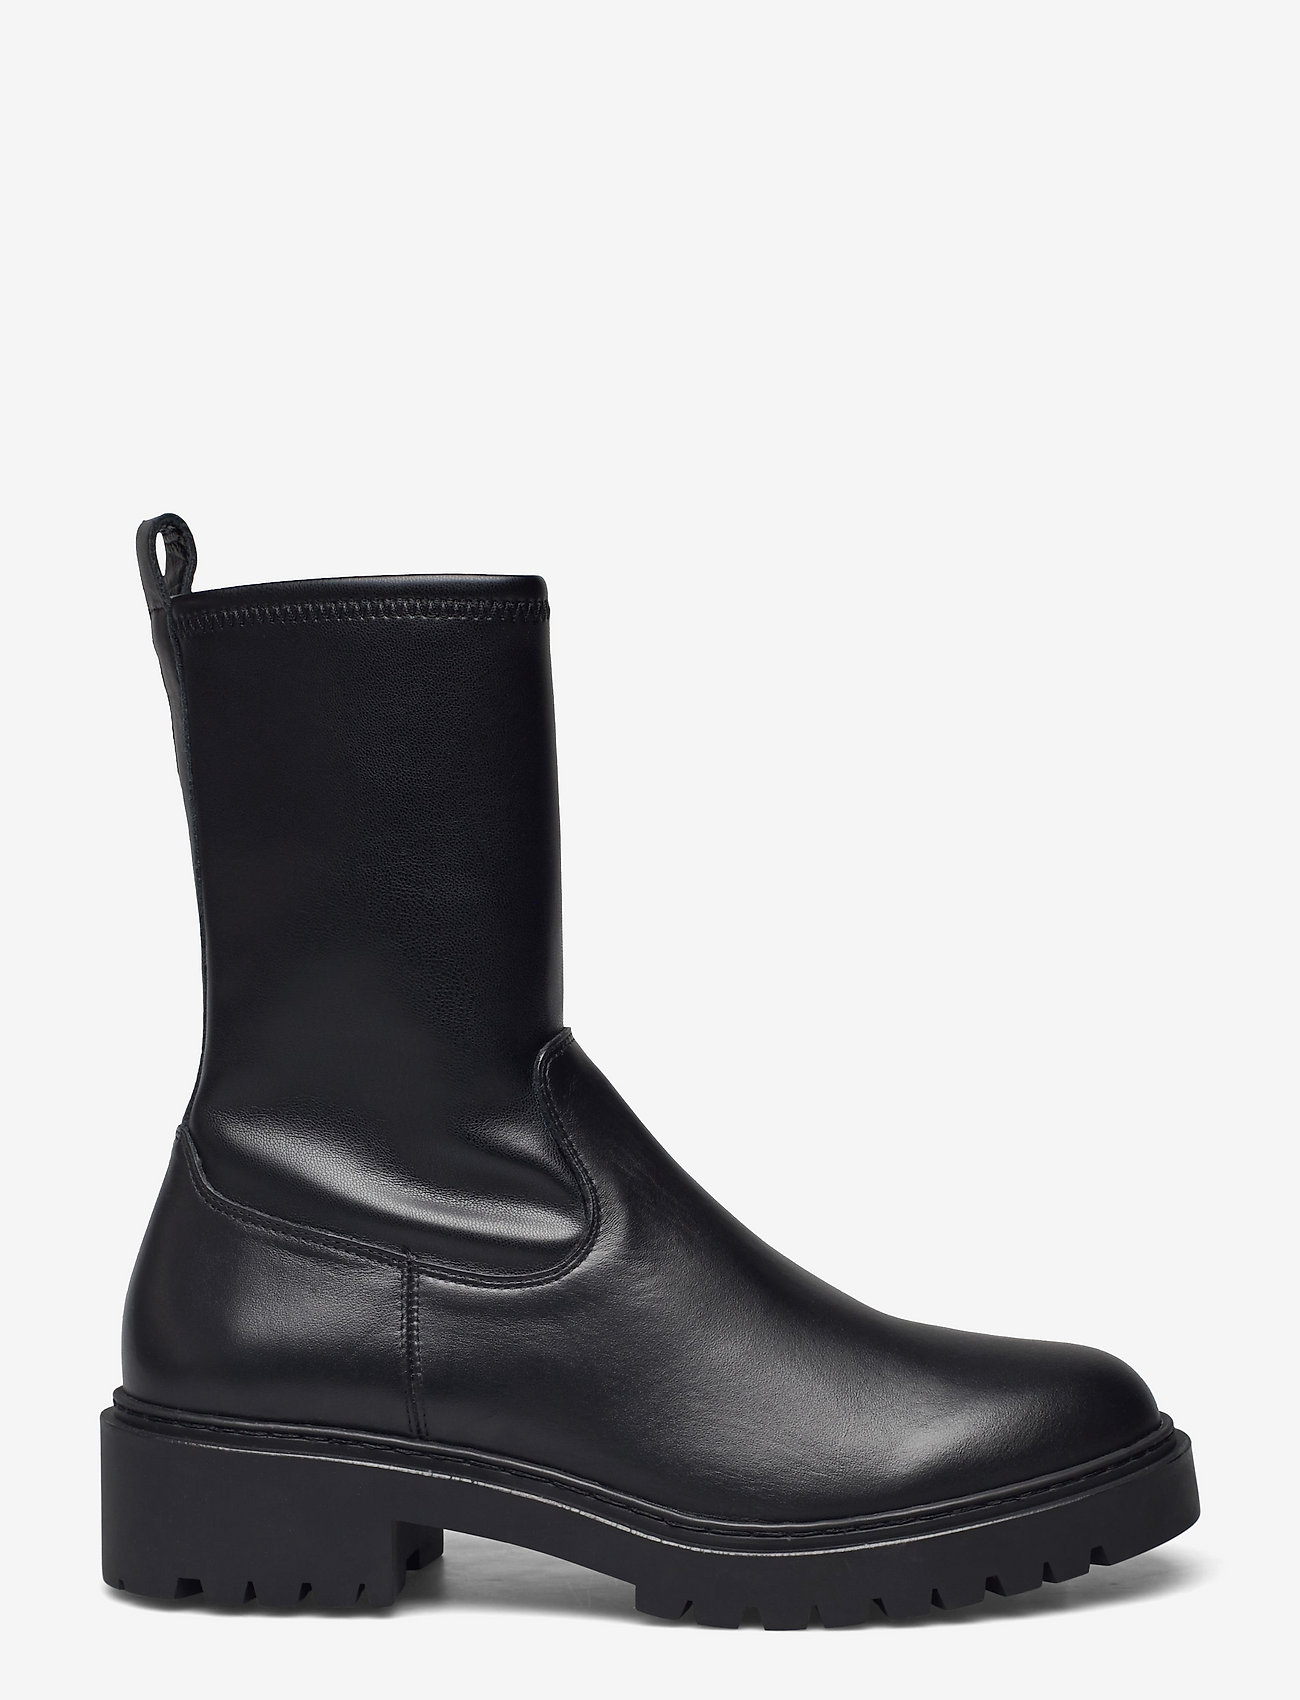 UNISA Guido_nf_stb - Flat ankle boots | Boozt.com